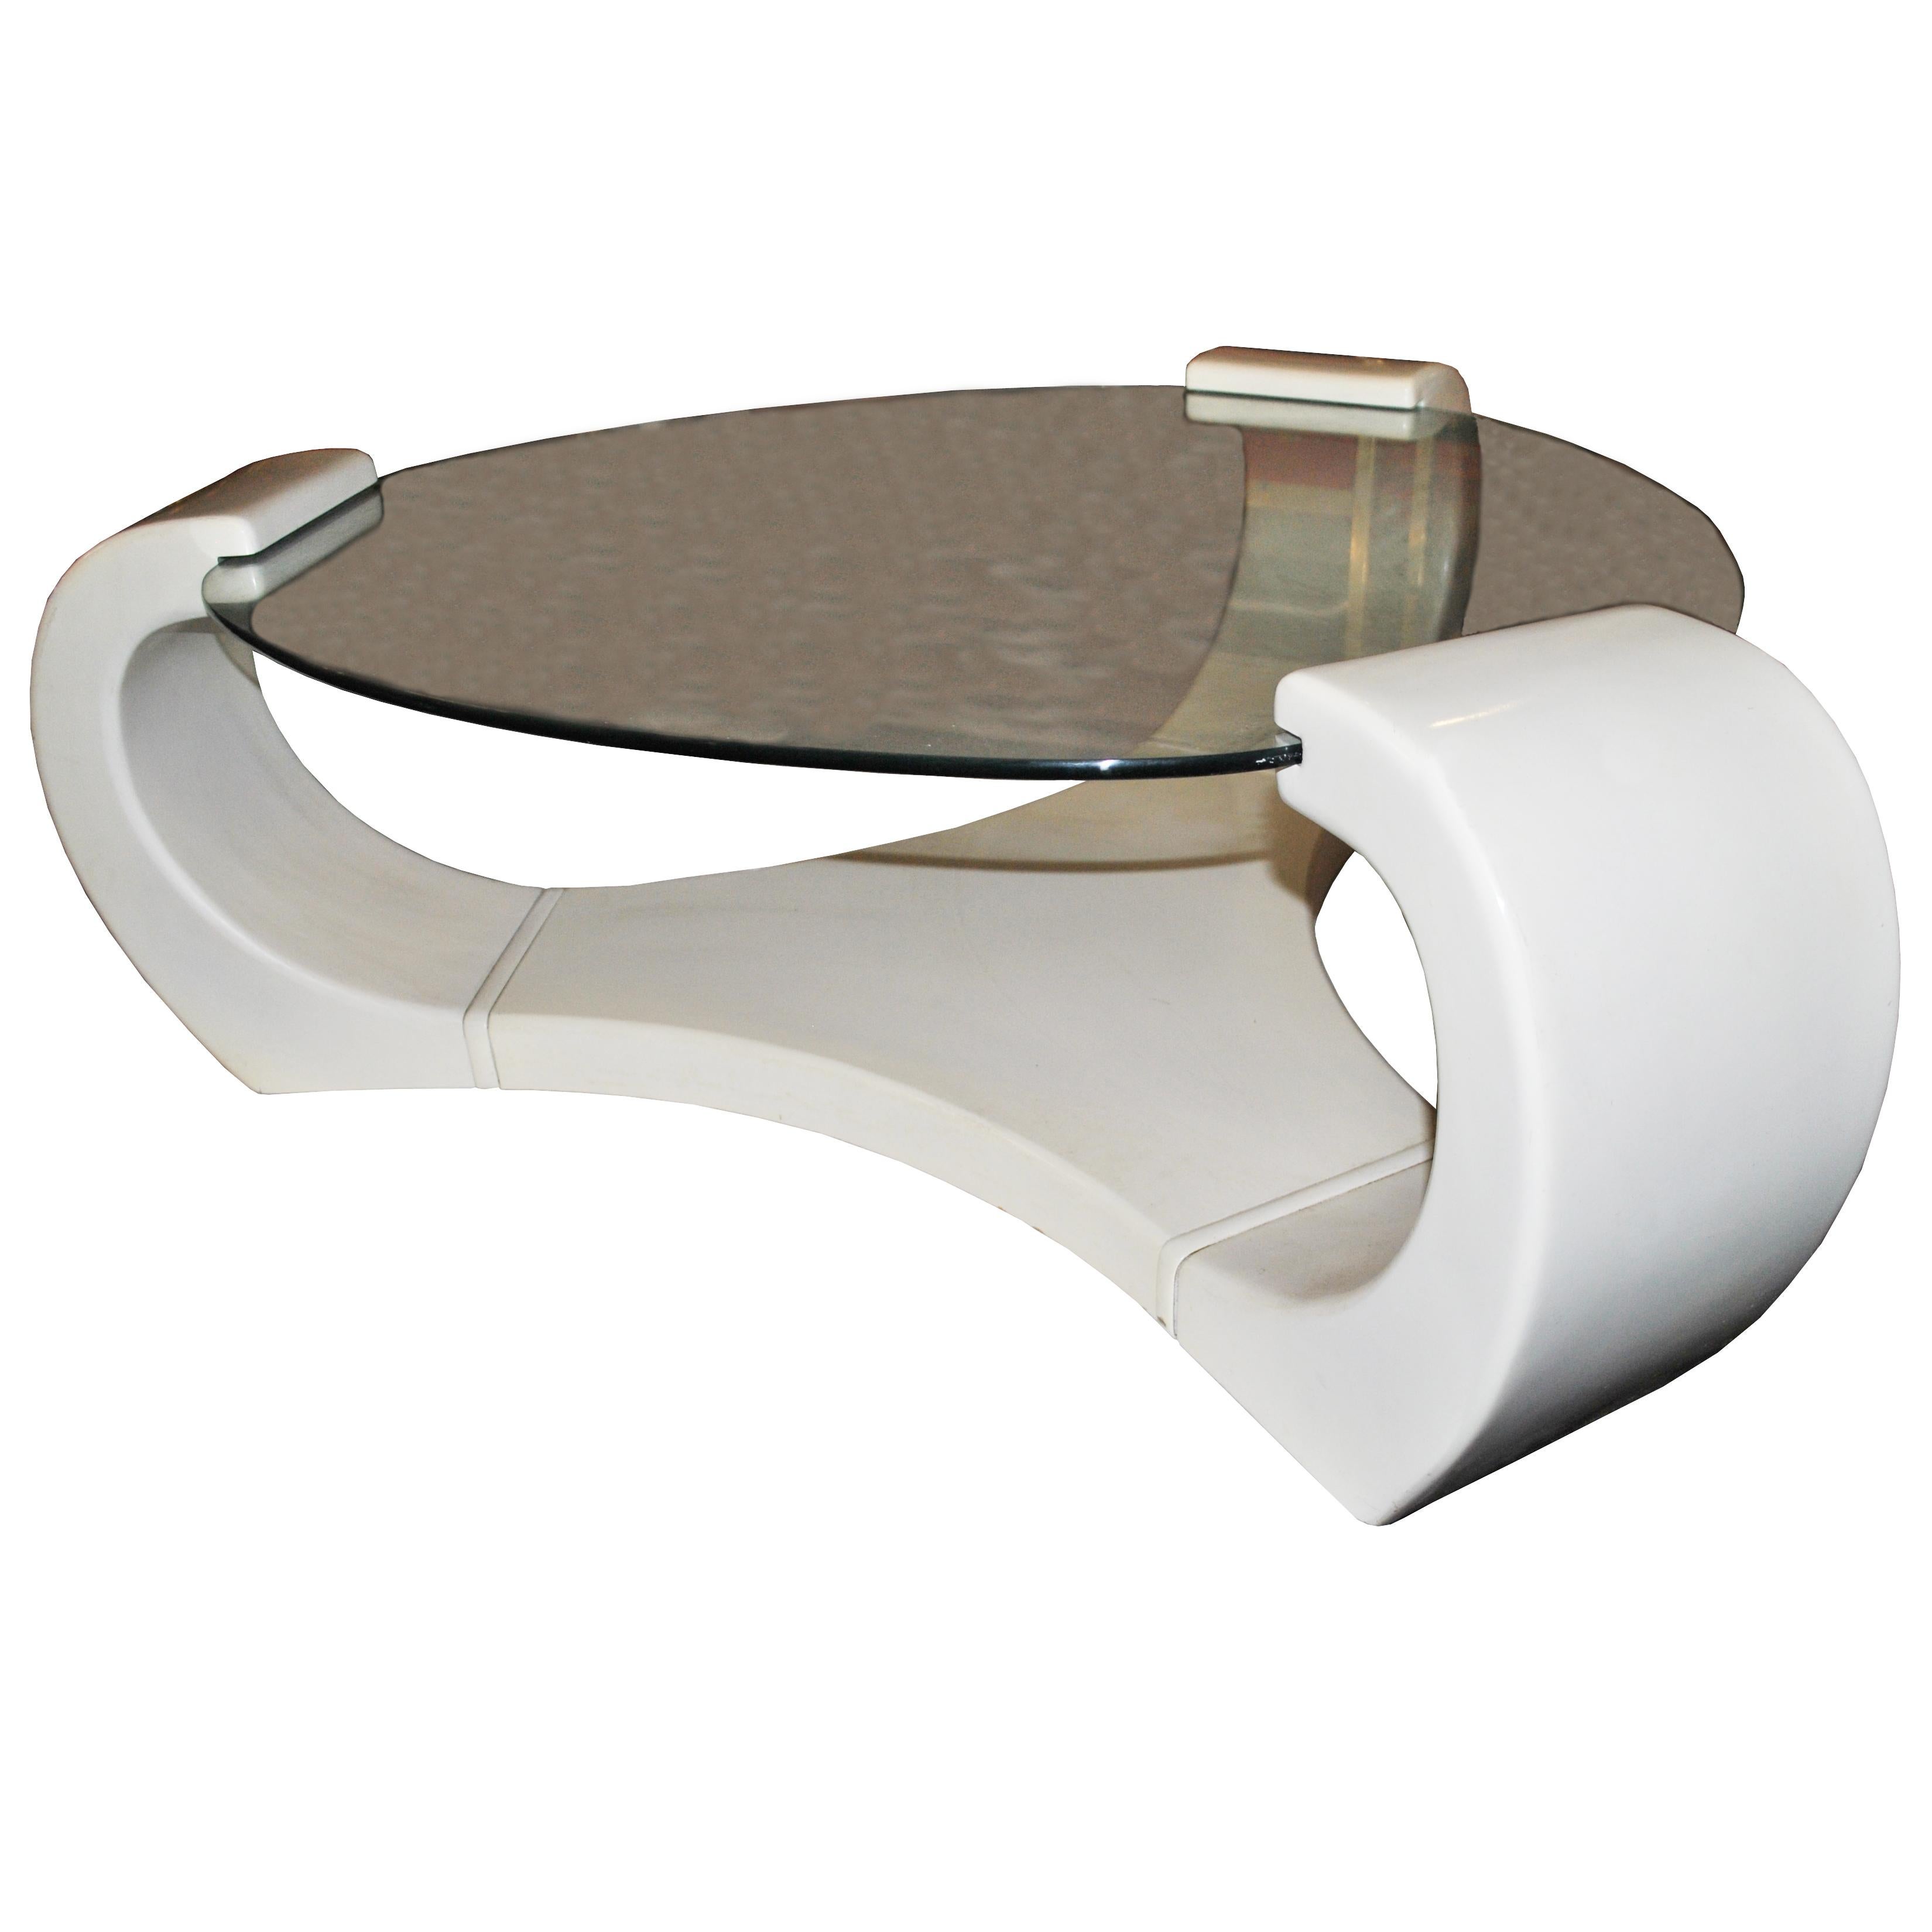 A modern sculptural form white lacquer coffee table with an round glass top. A design reminiscent of the works of Karl Springer.